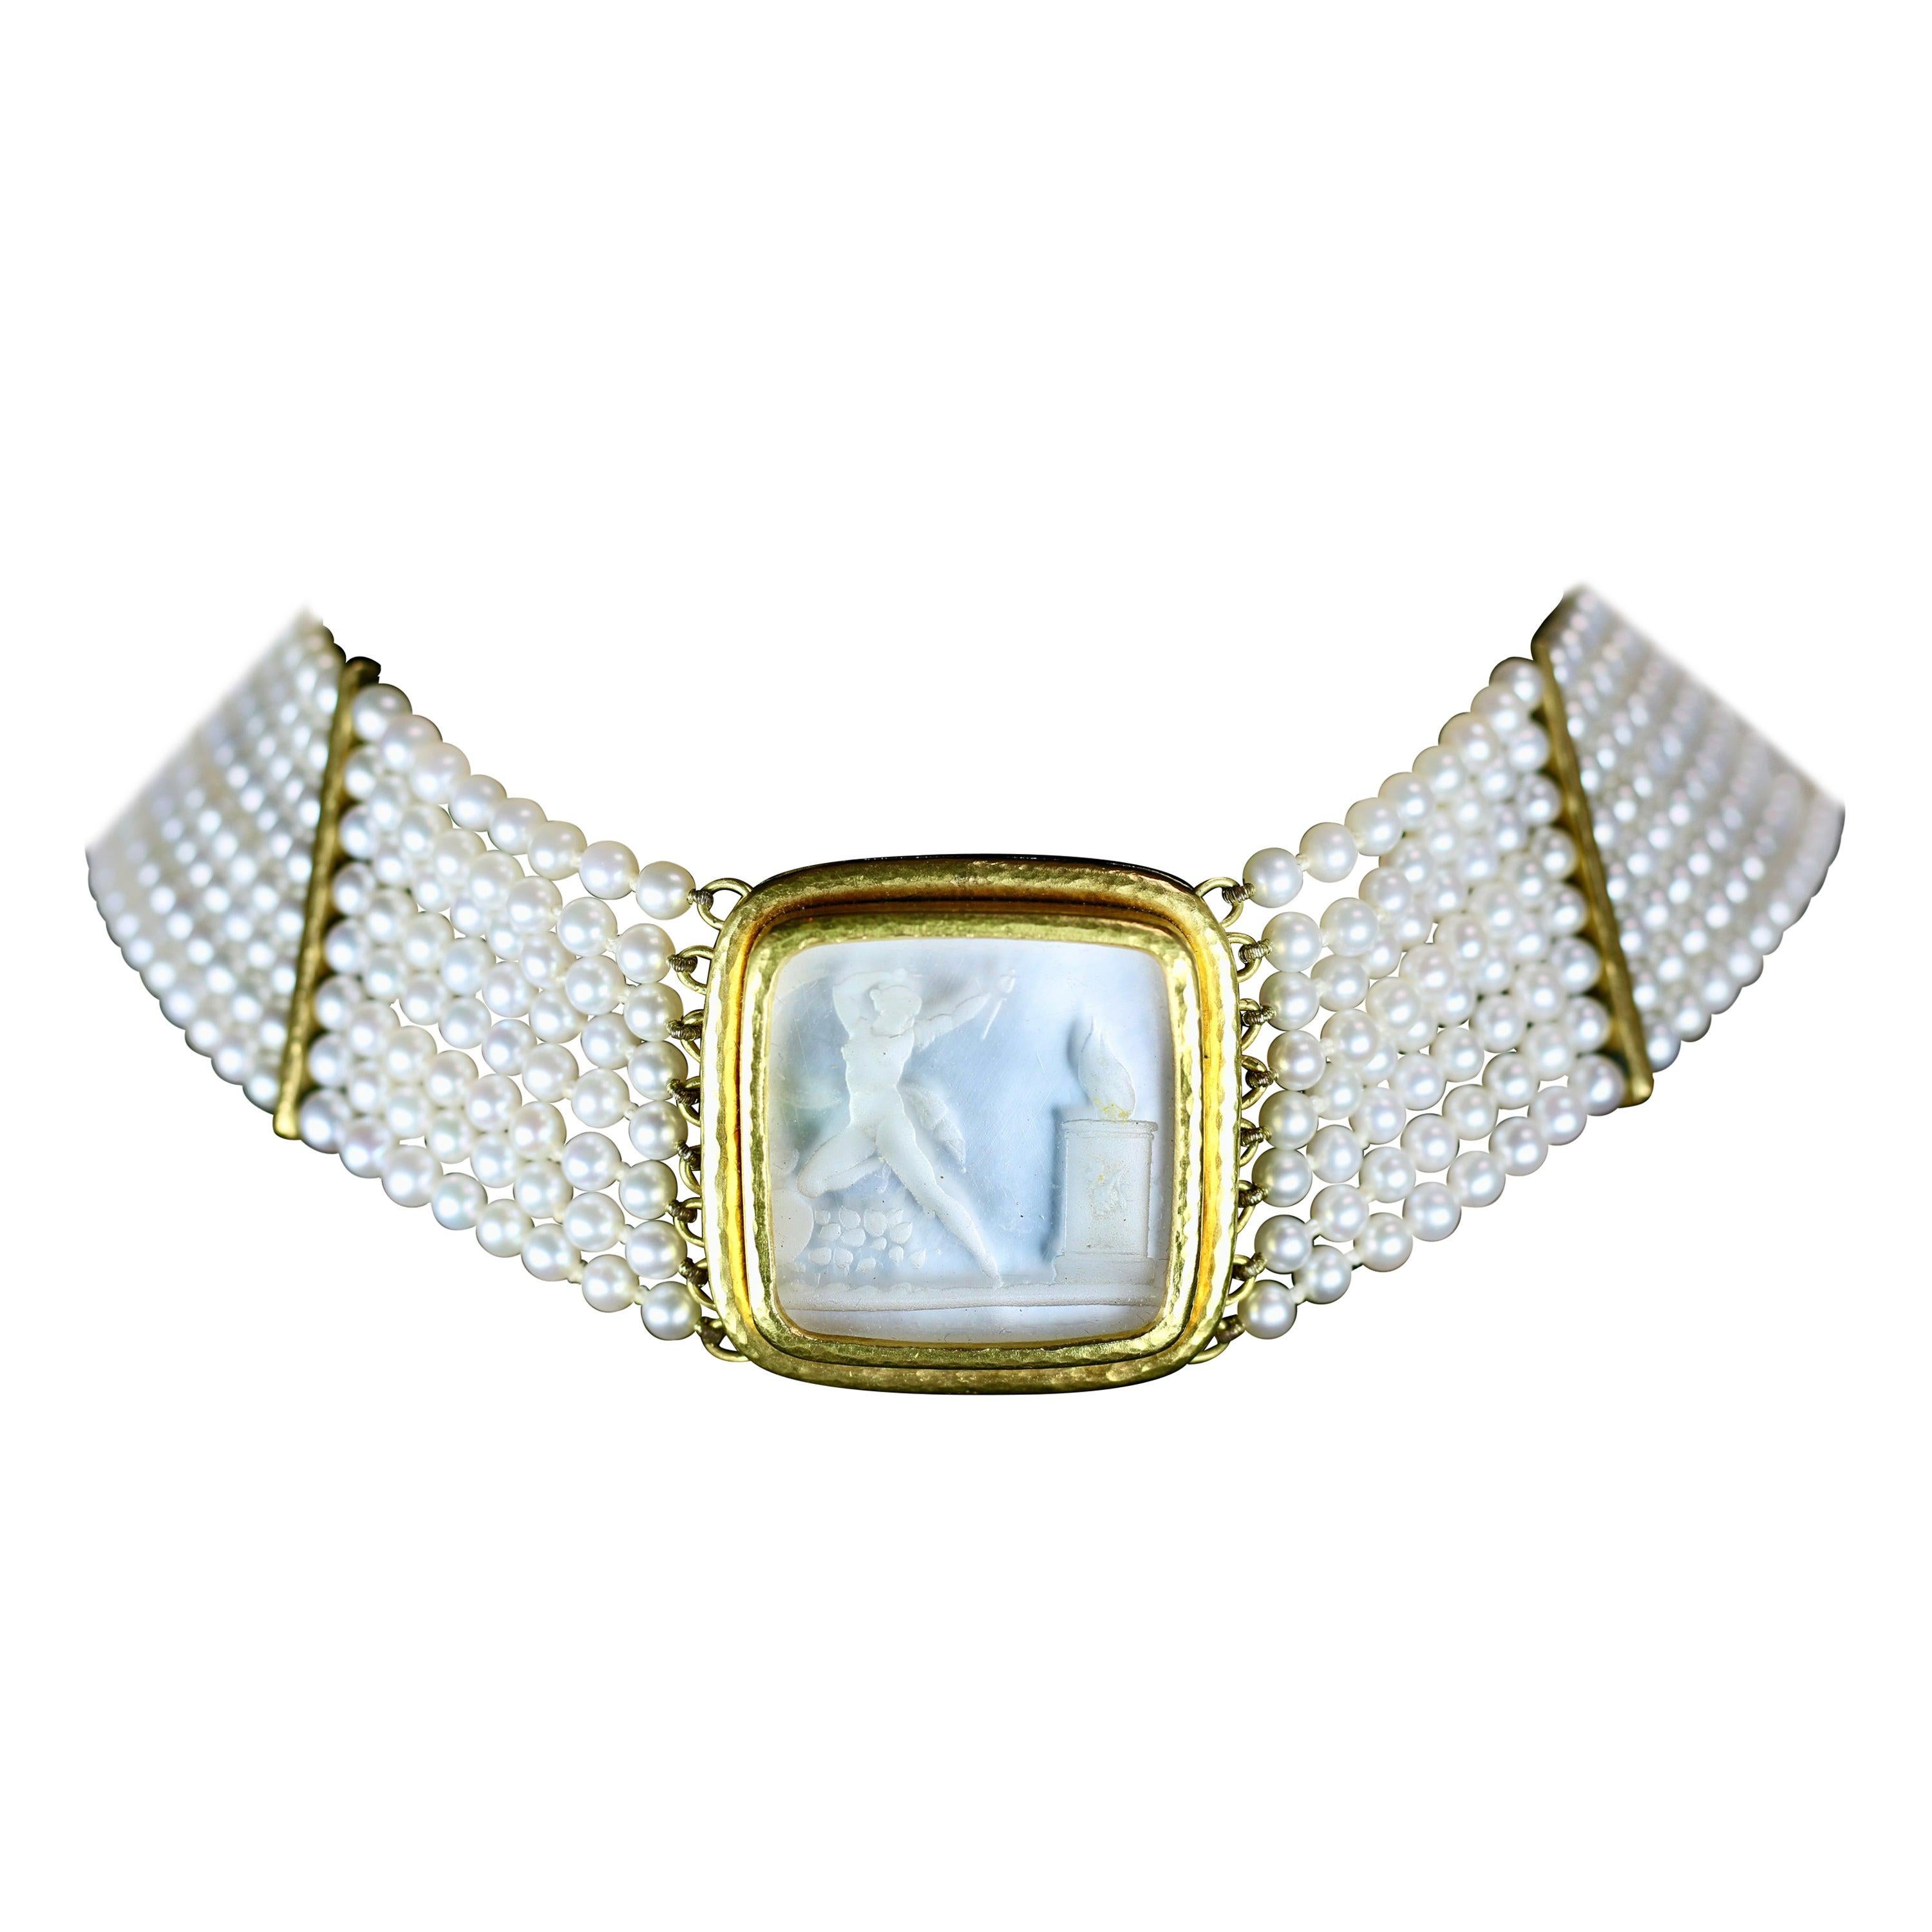 Elizabeth Locke Pearl Choker with Mother of Pearl Intaglio and Gold